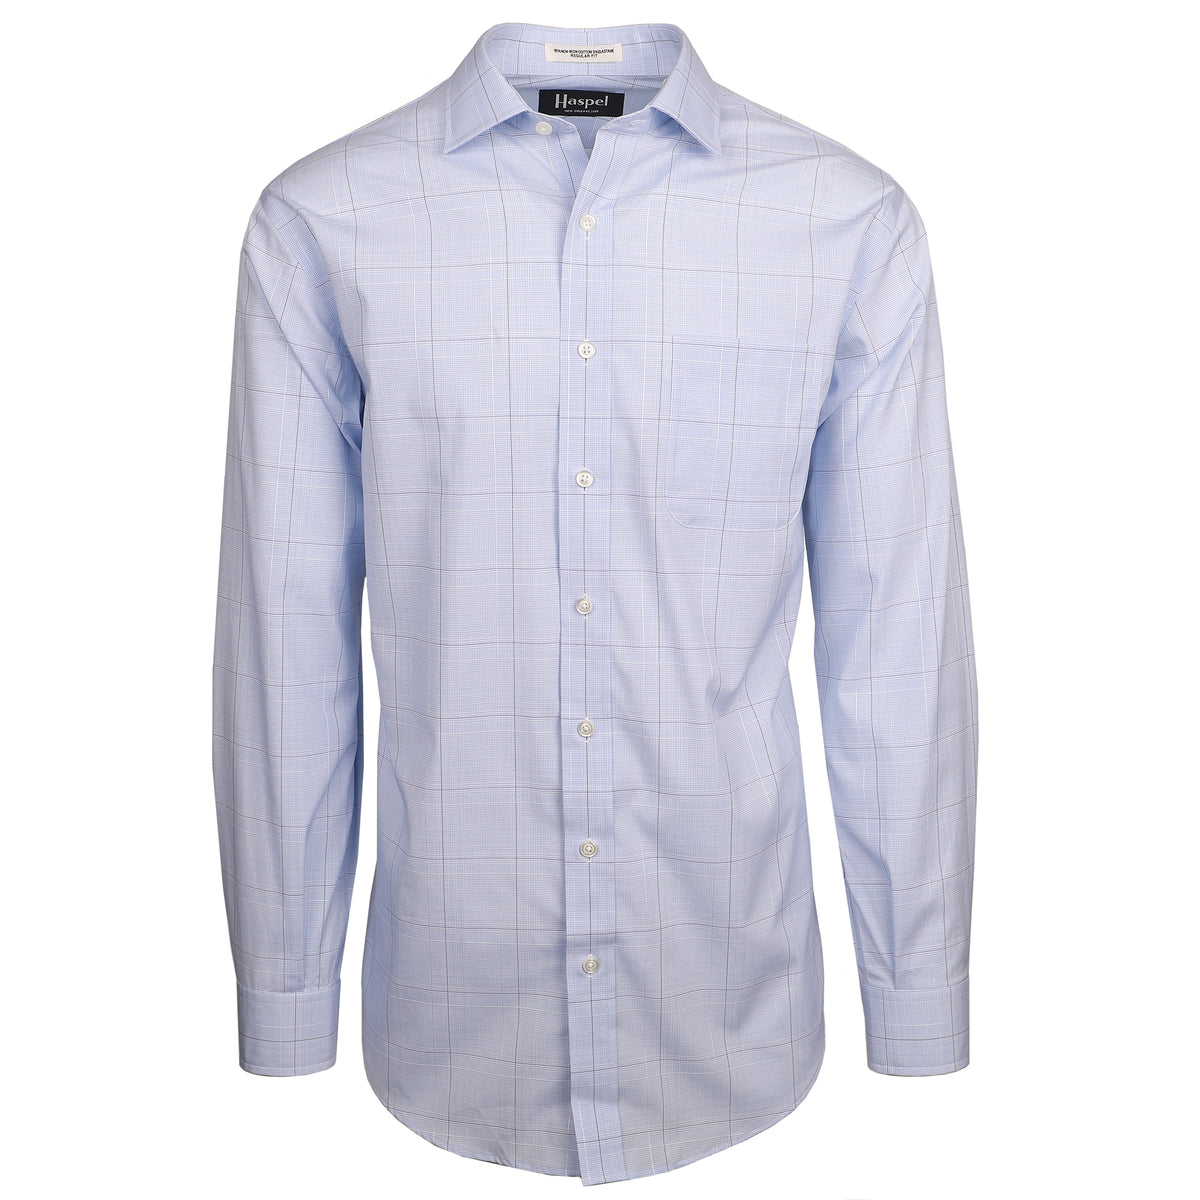 Classic men&#39;s dress shirts here that were carefully chosen to pair up with our unique, lightweight men&#39;s suits.  100% Imported Combed Cotton  •  80&#39;s 2-Ply/Non-Iron Pinpoint Fabric  •  Point Collar  •  Long Sleeve, Button Cuff